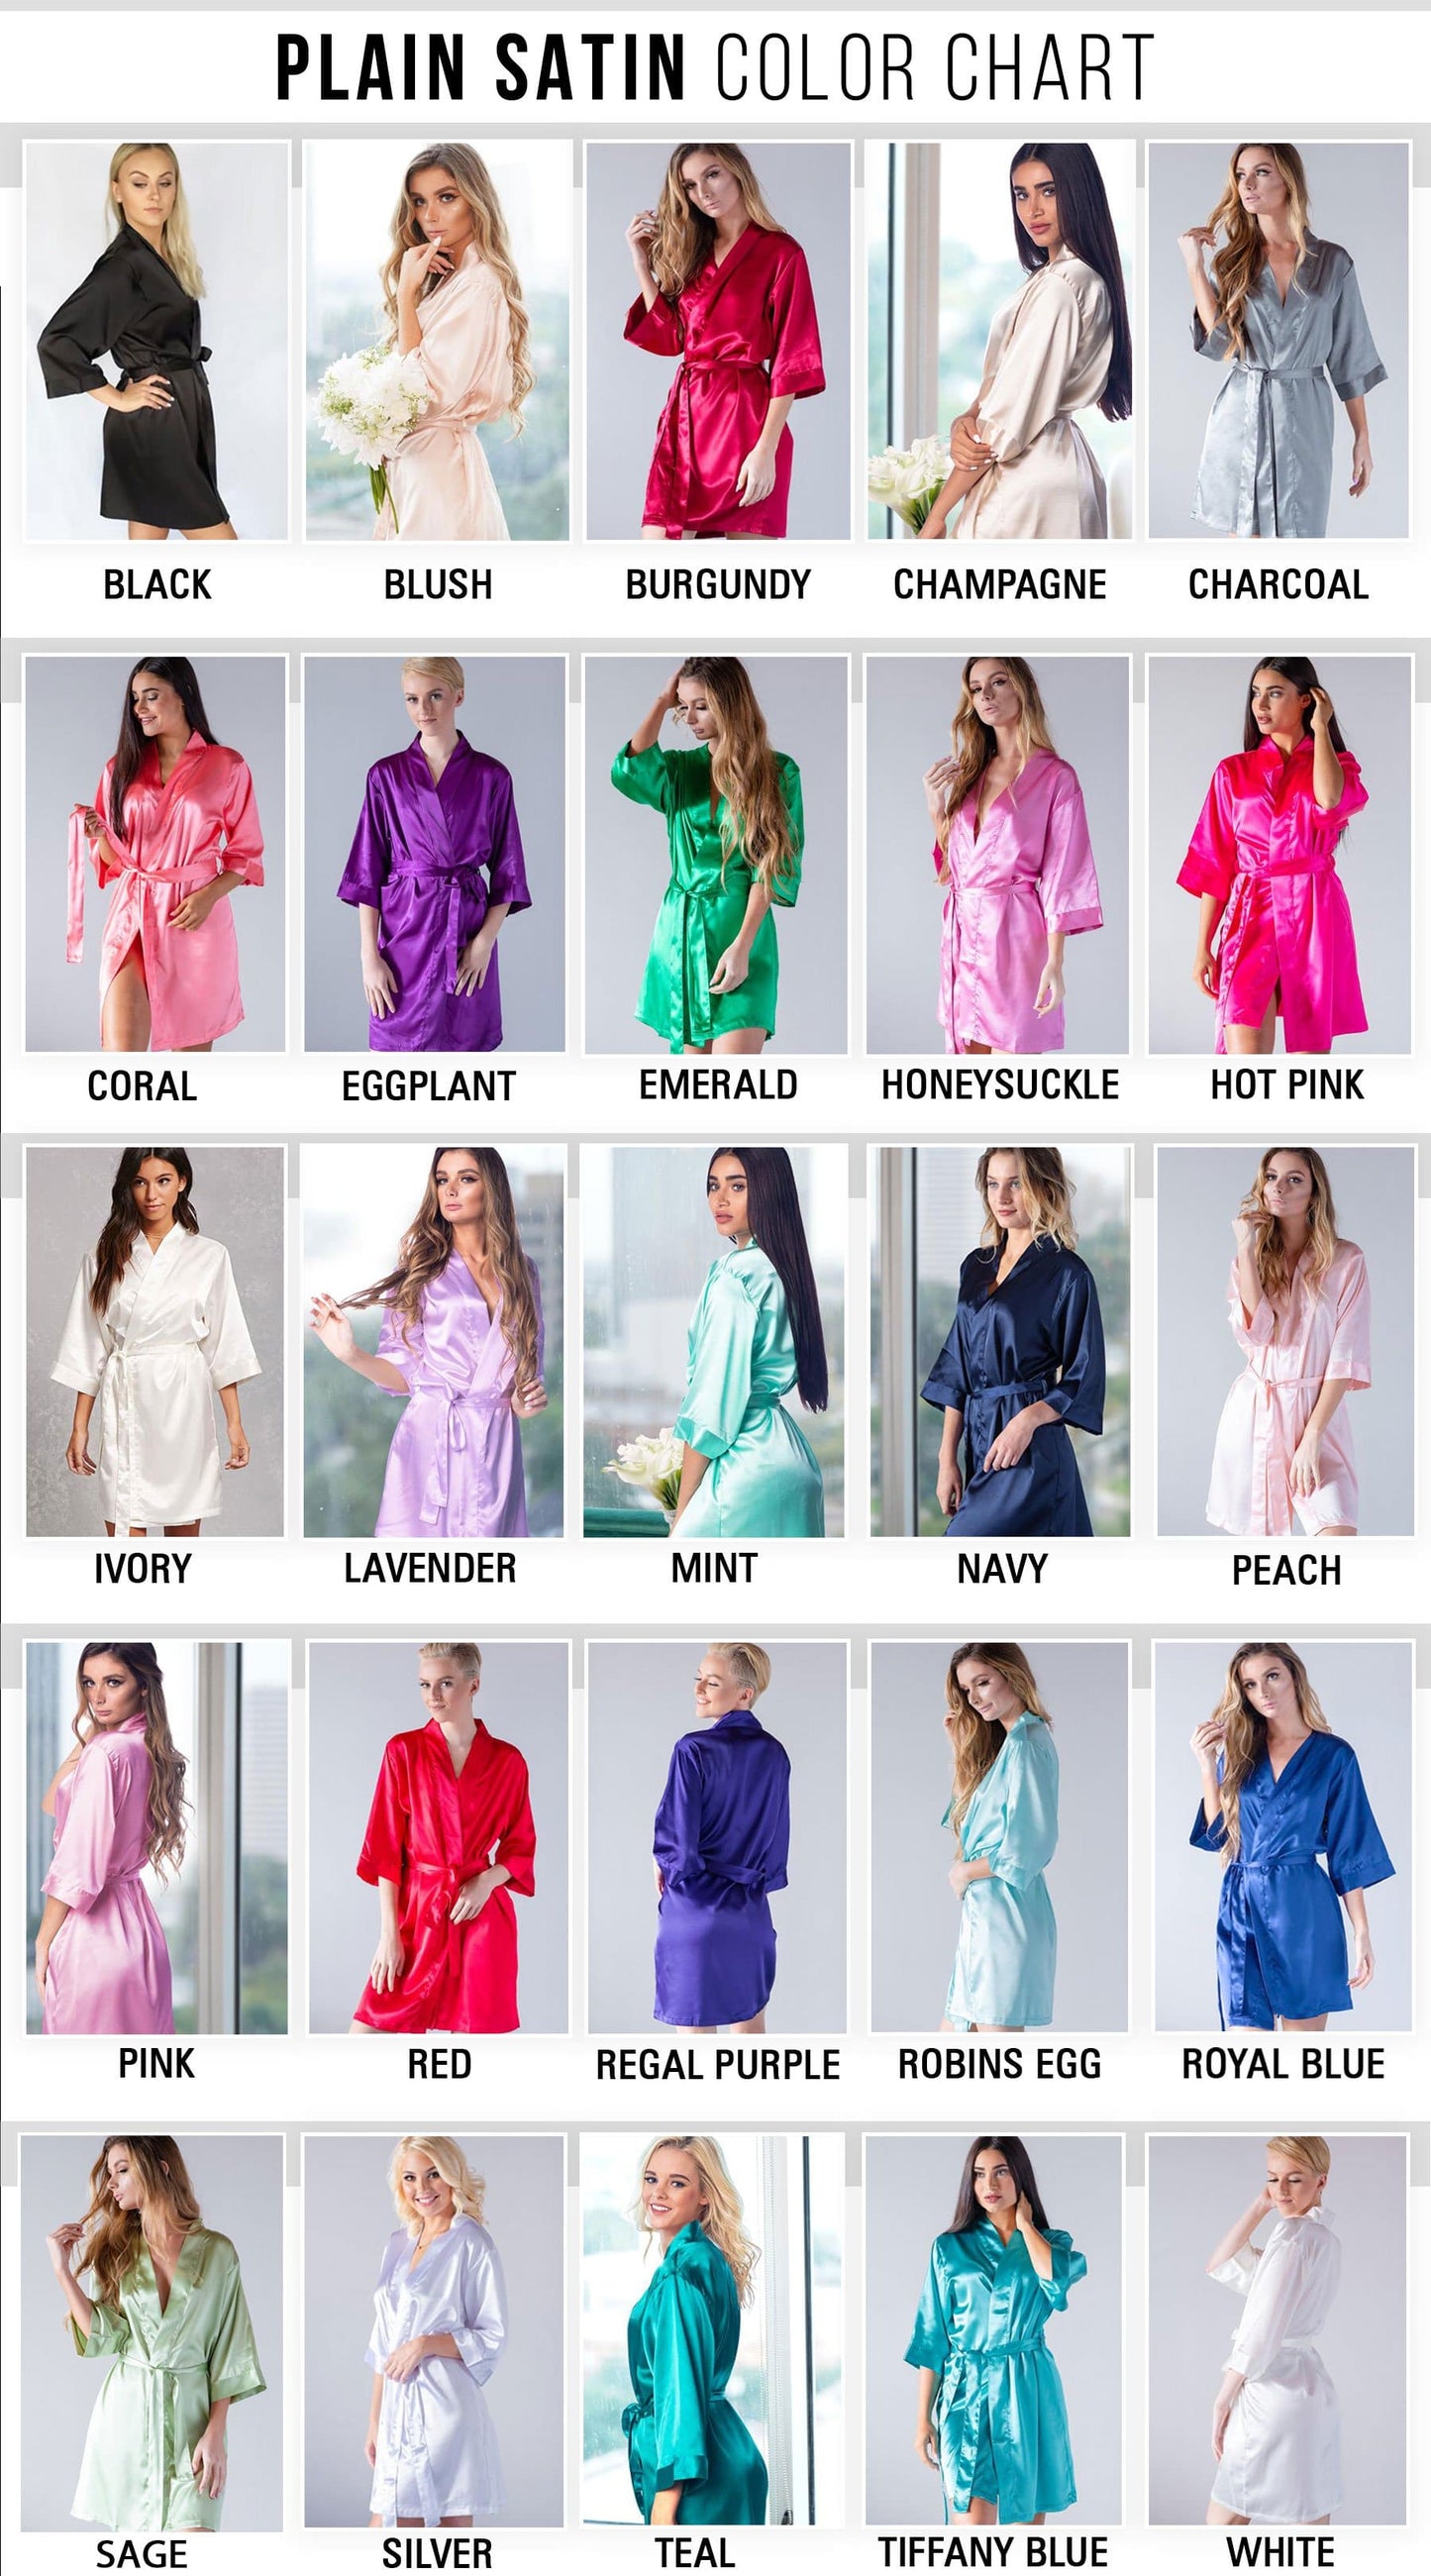 Longhand Style - Matron of Honor Robe